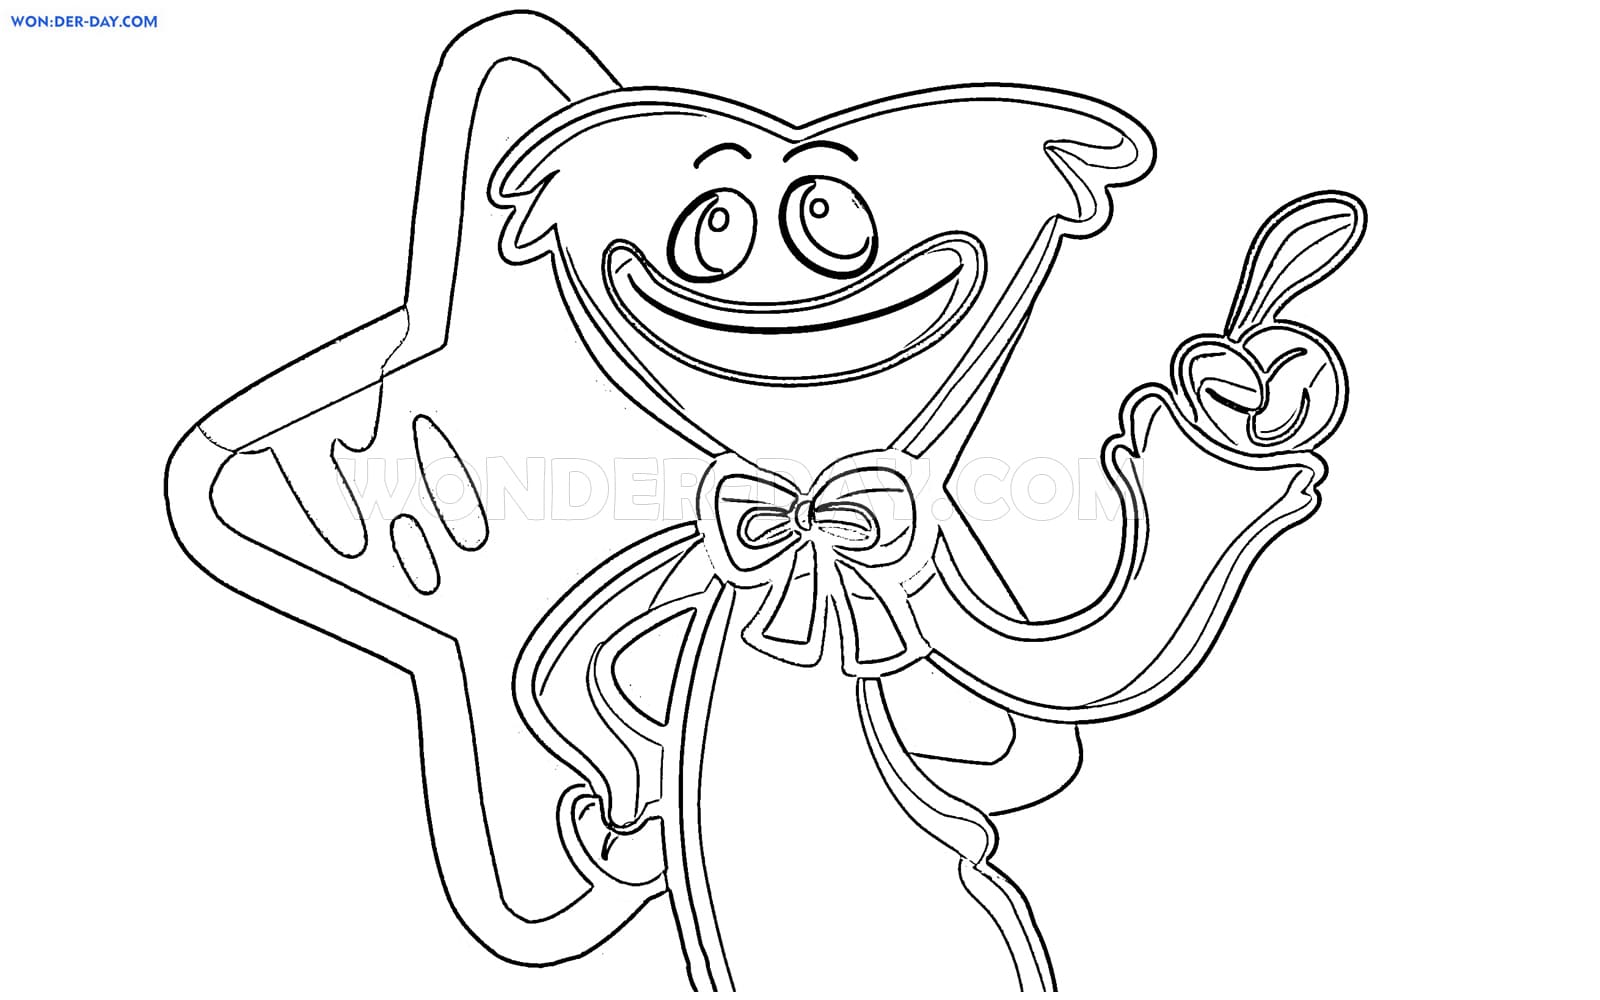 Poppy Playtime coloring pages | Free coloring pages